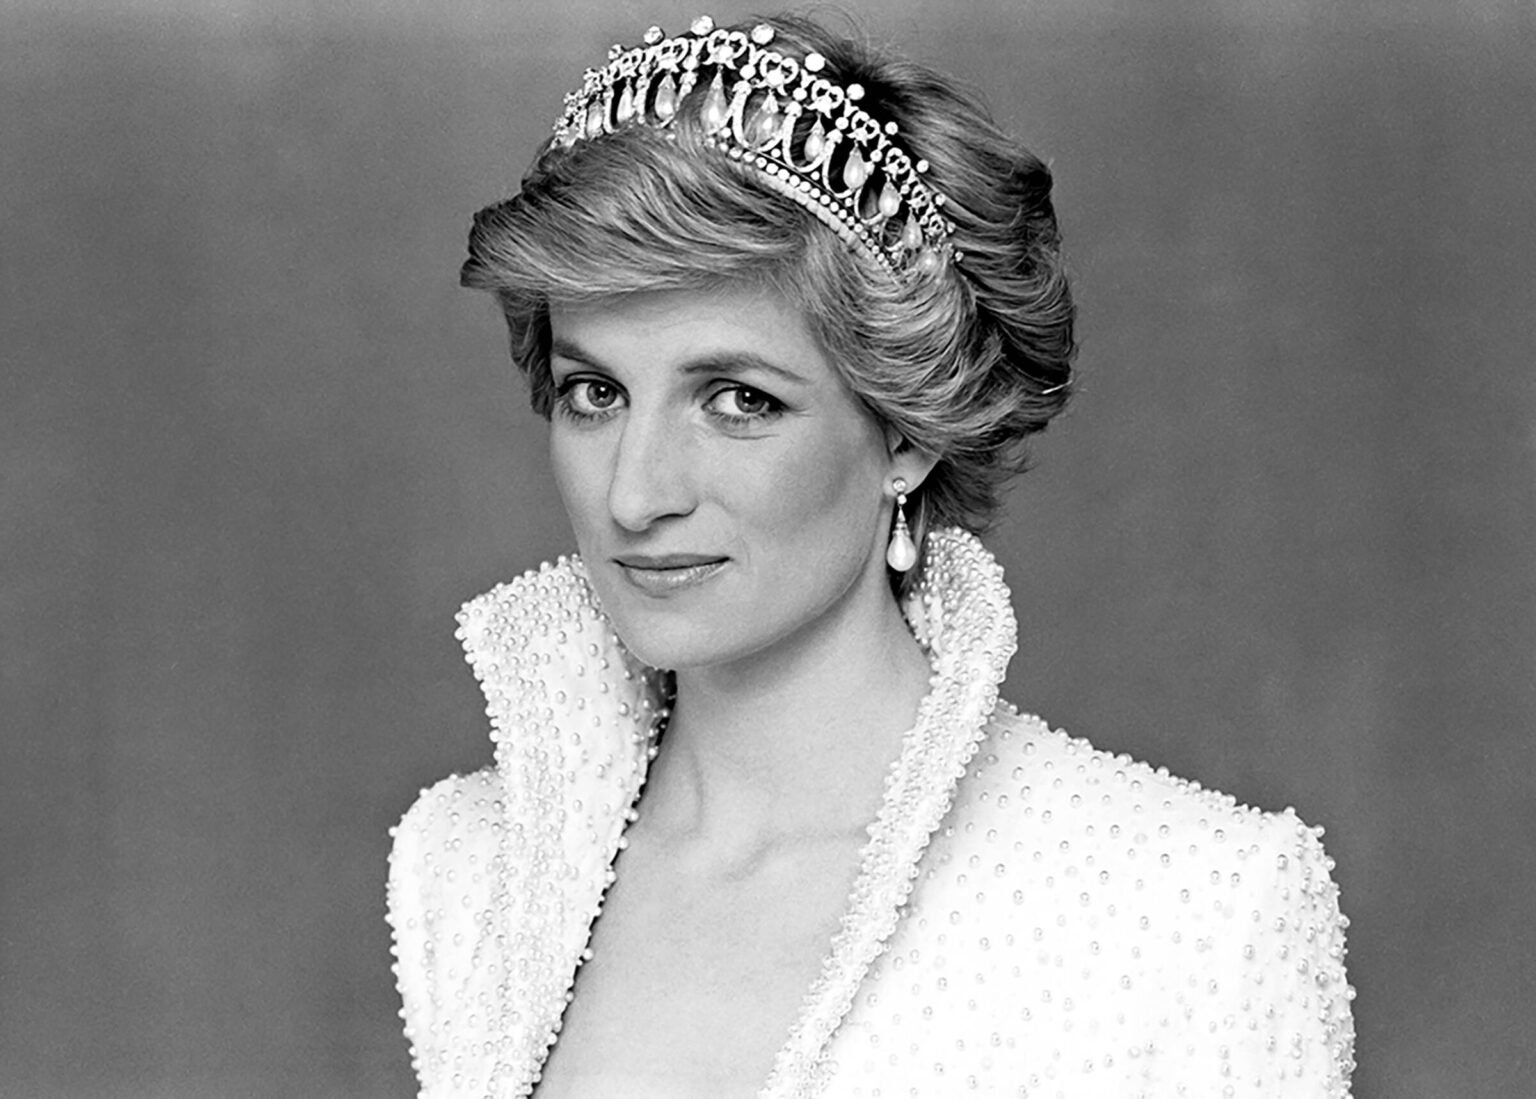 While many see young Princess Diana as a victim beyond reproach, others say she wasn't that innocent. Dive into the Spencer family history and see why.